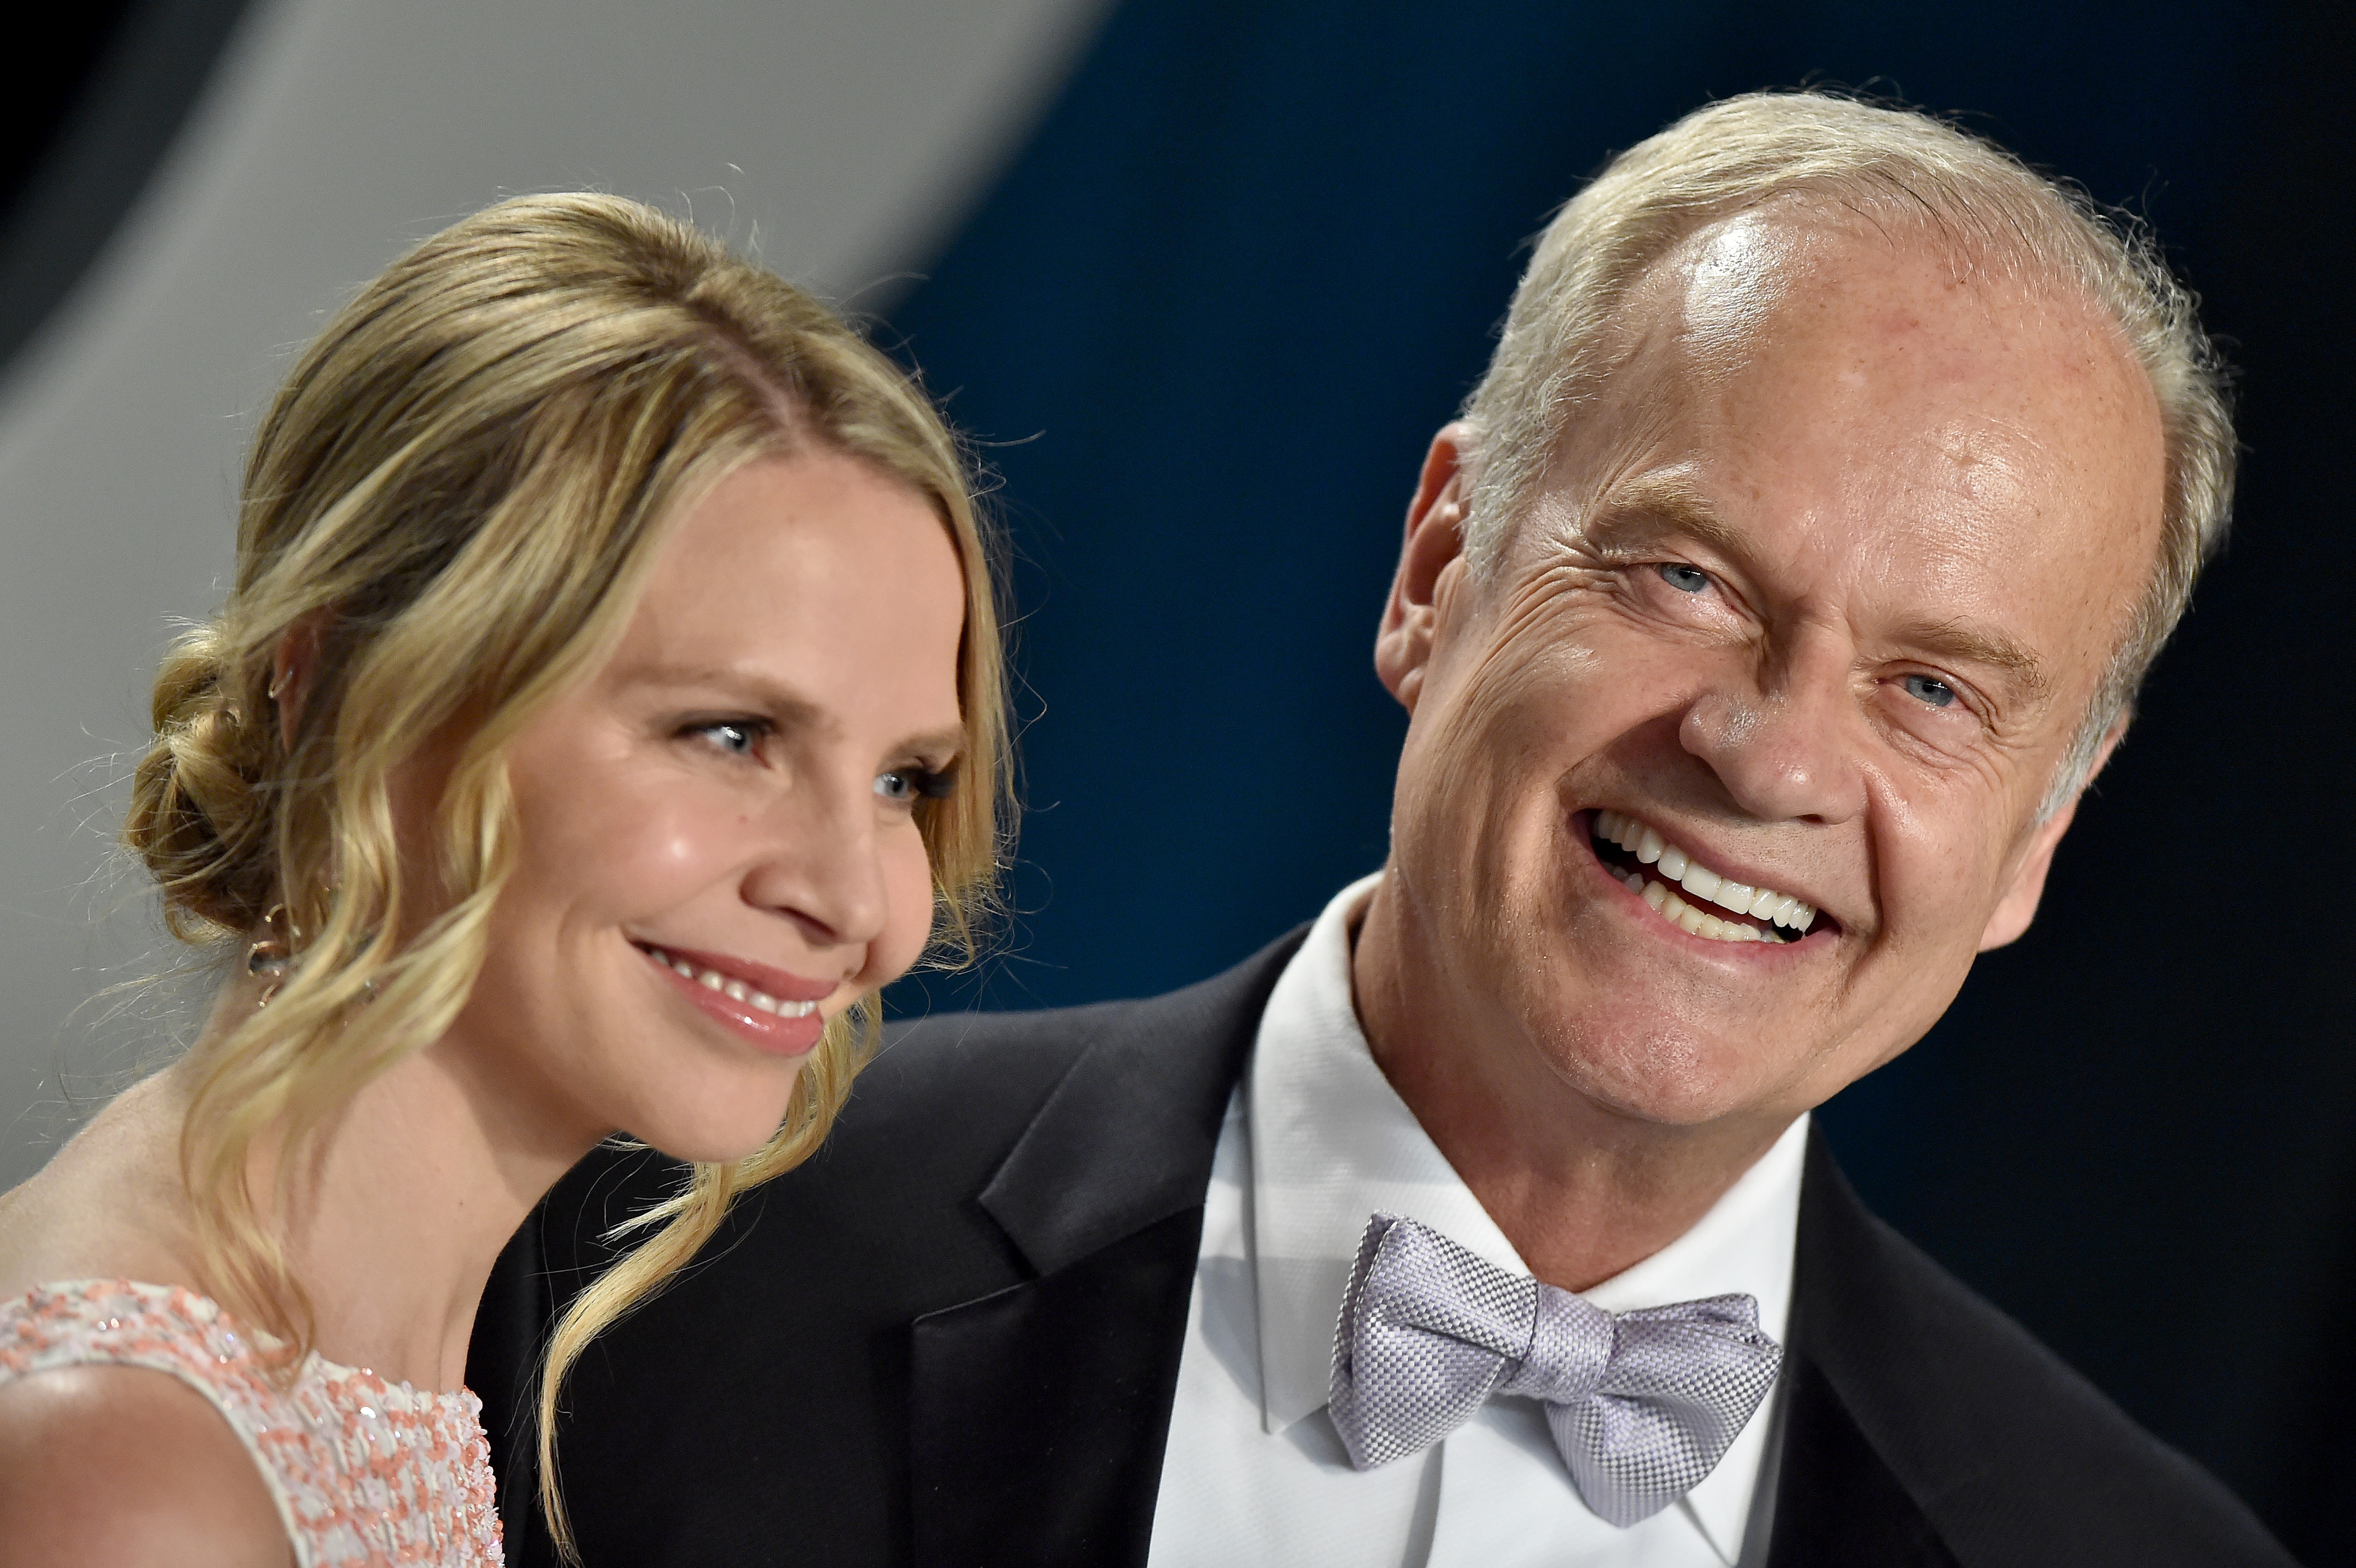 ayte Walsh and Kelsey Grammer attend the 2020 Vanity Fair Oscar Party hosted by Radhika Jones at Wallis Annenberg Center for the Performing Arts on February 09, 2020 in Beverly Hills, California | Source: Getty Images